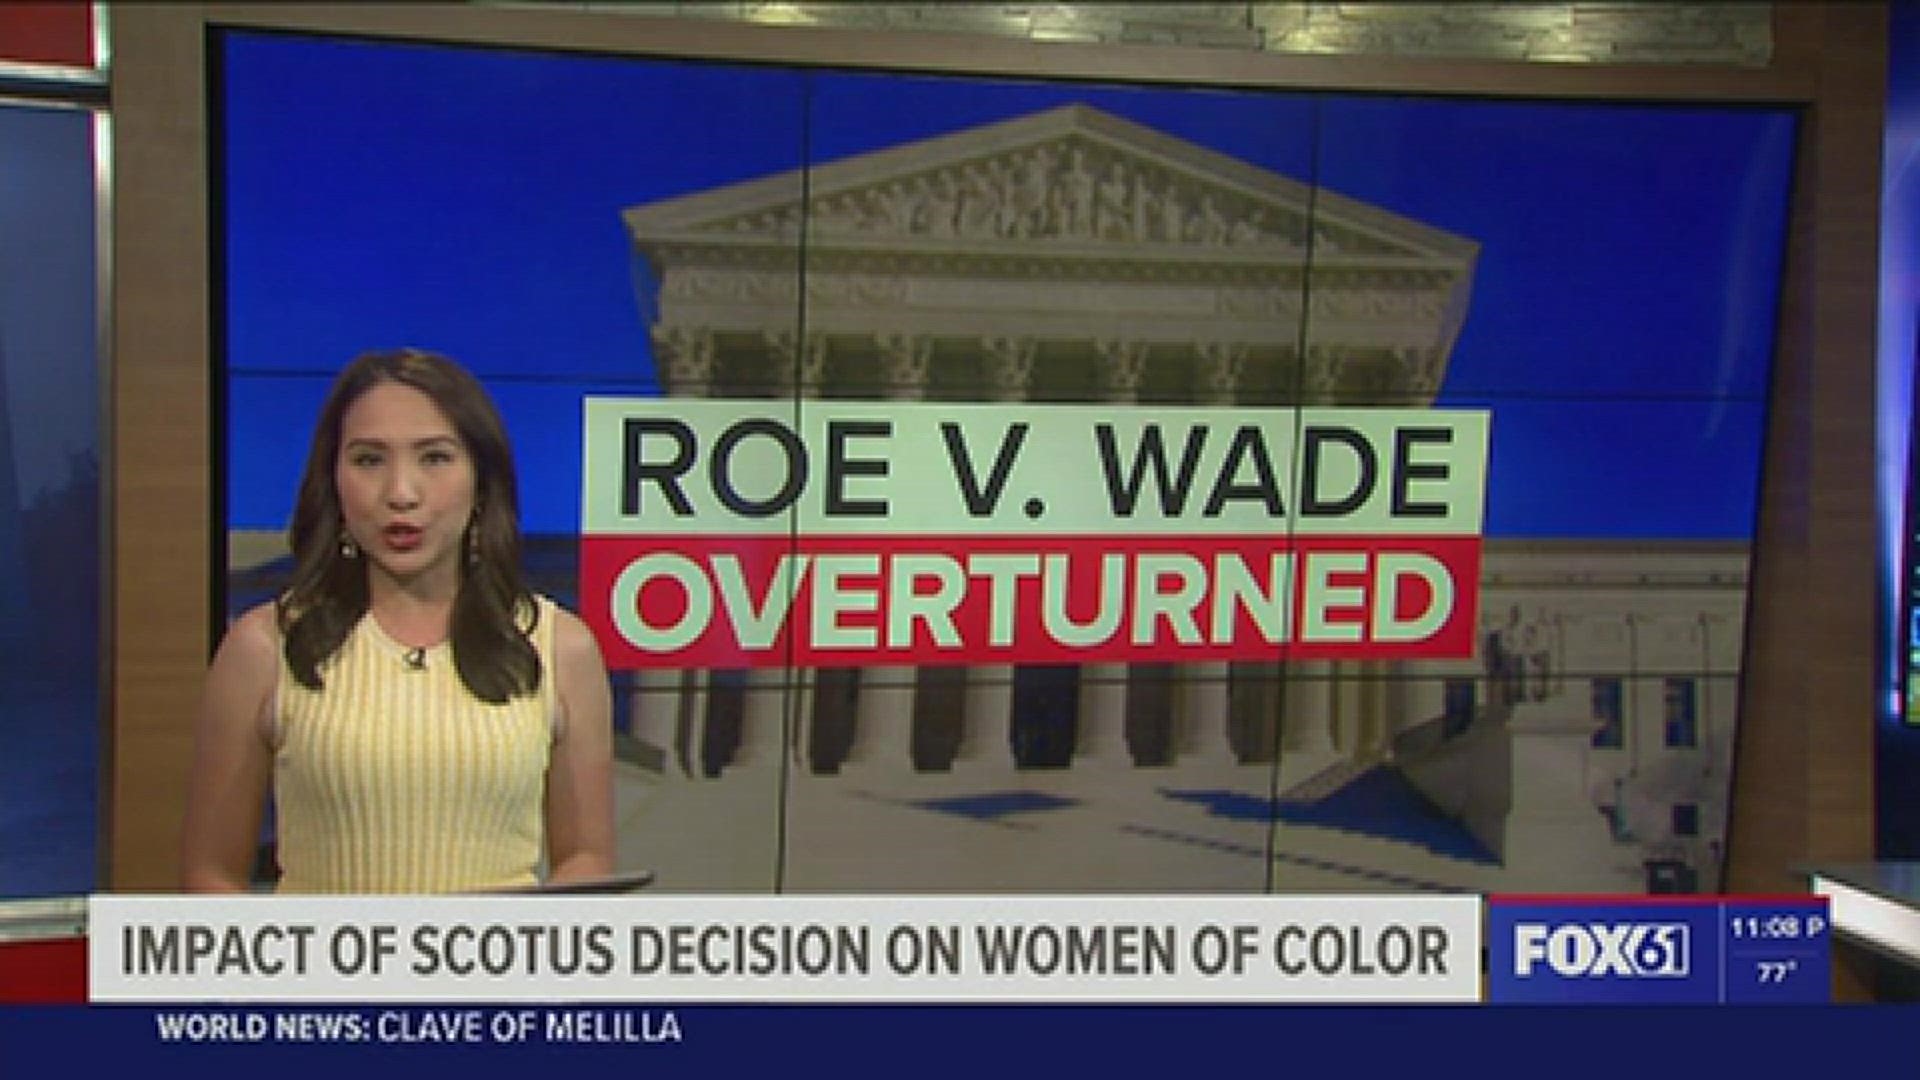 The Supreme Court overturned Roe v. Wade Friday which protected access to abortions nationwide. There are concerns about how this could impact women of color.